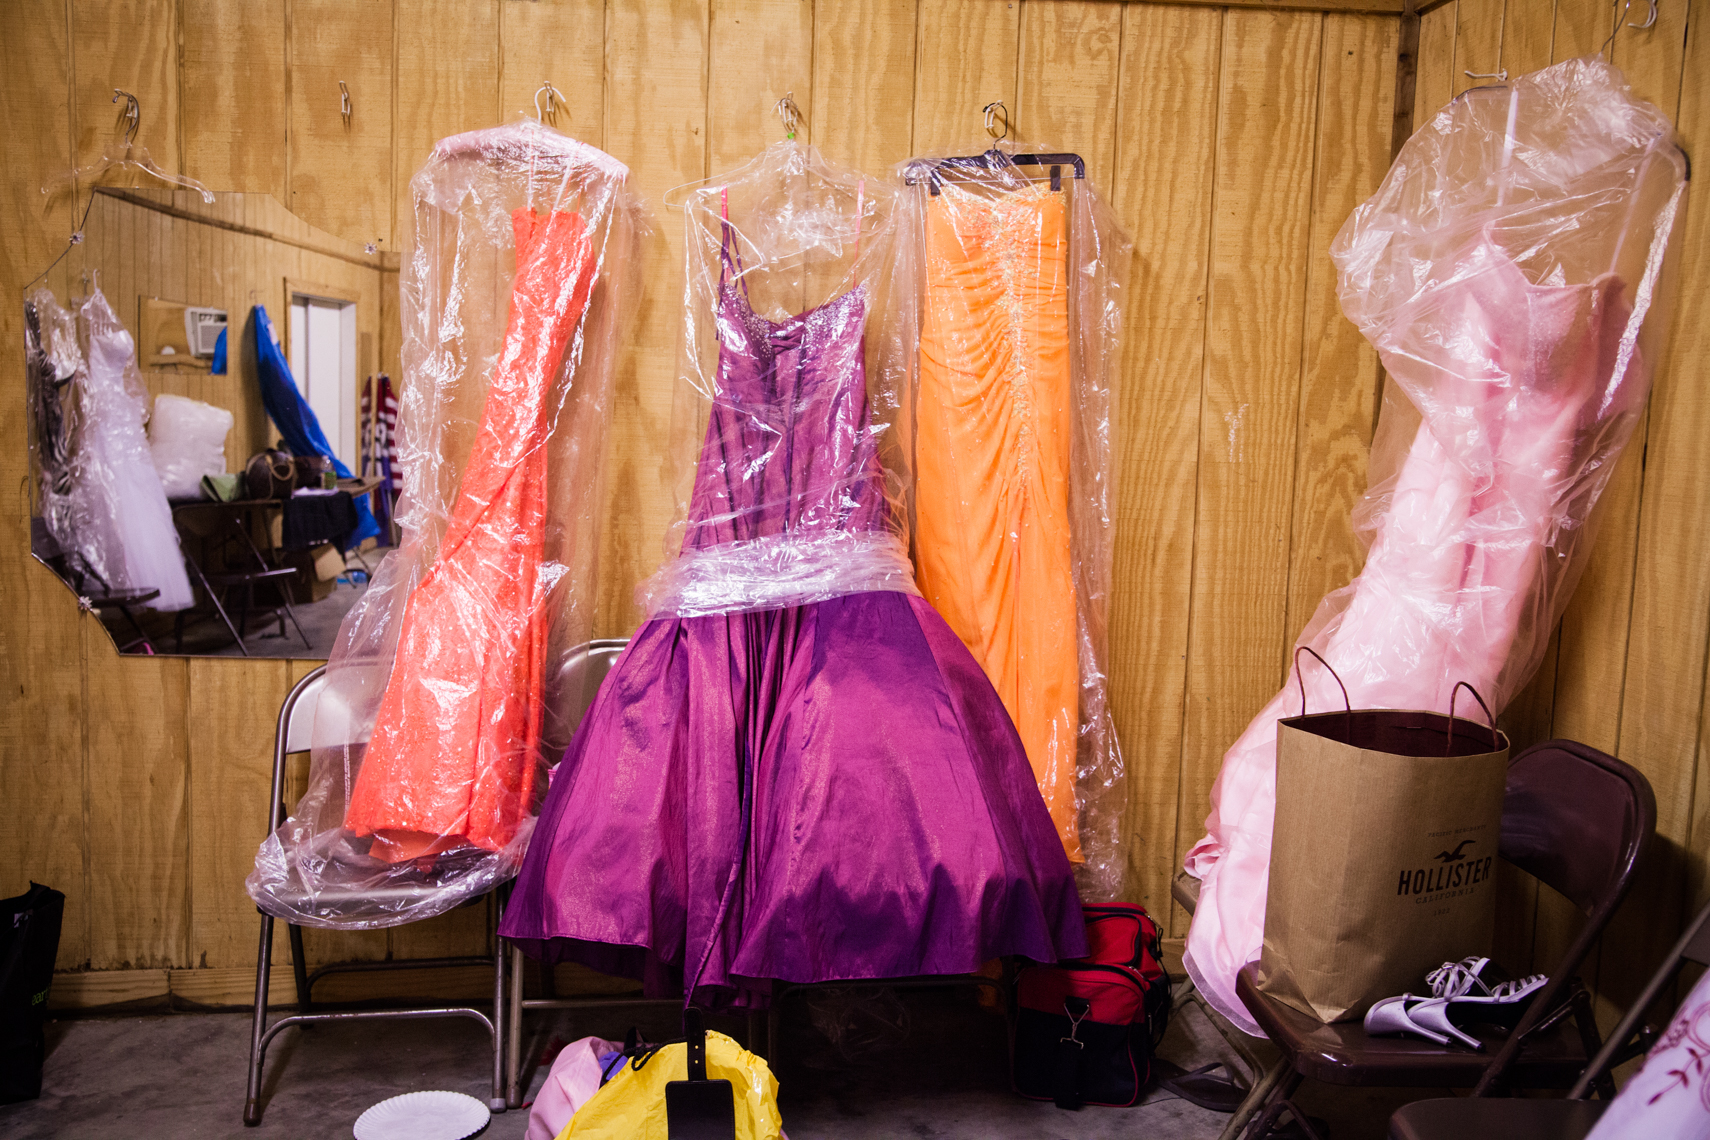 Beauty pageant contestant gowns, dresses, broken mirror, Wilson County Fair, Lebanon, Tennessee